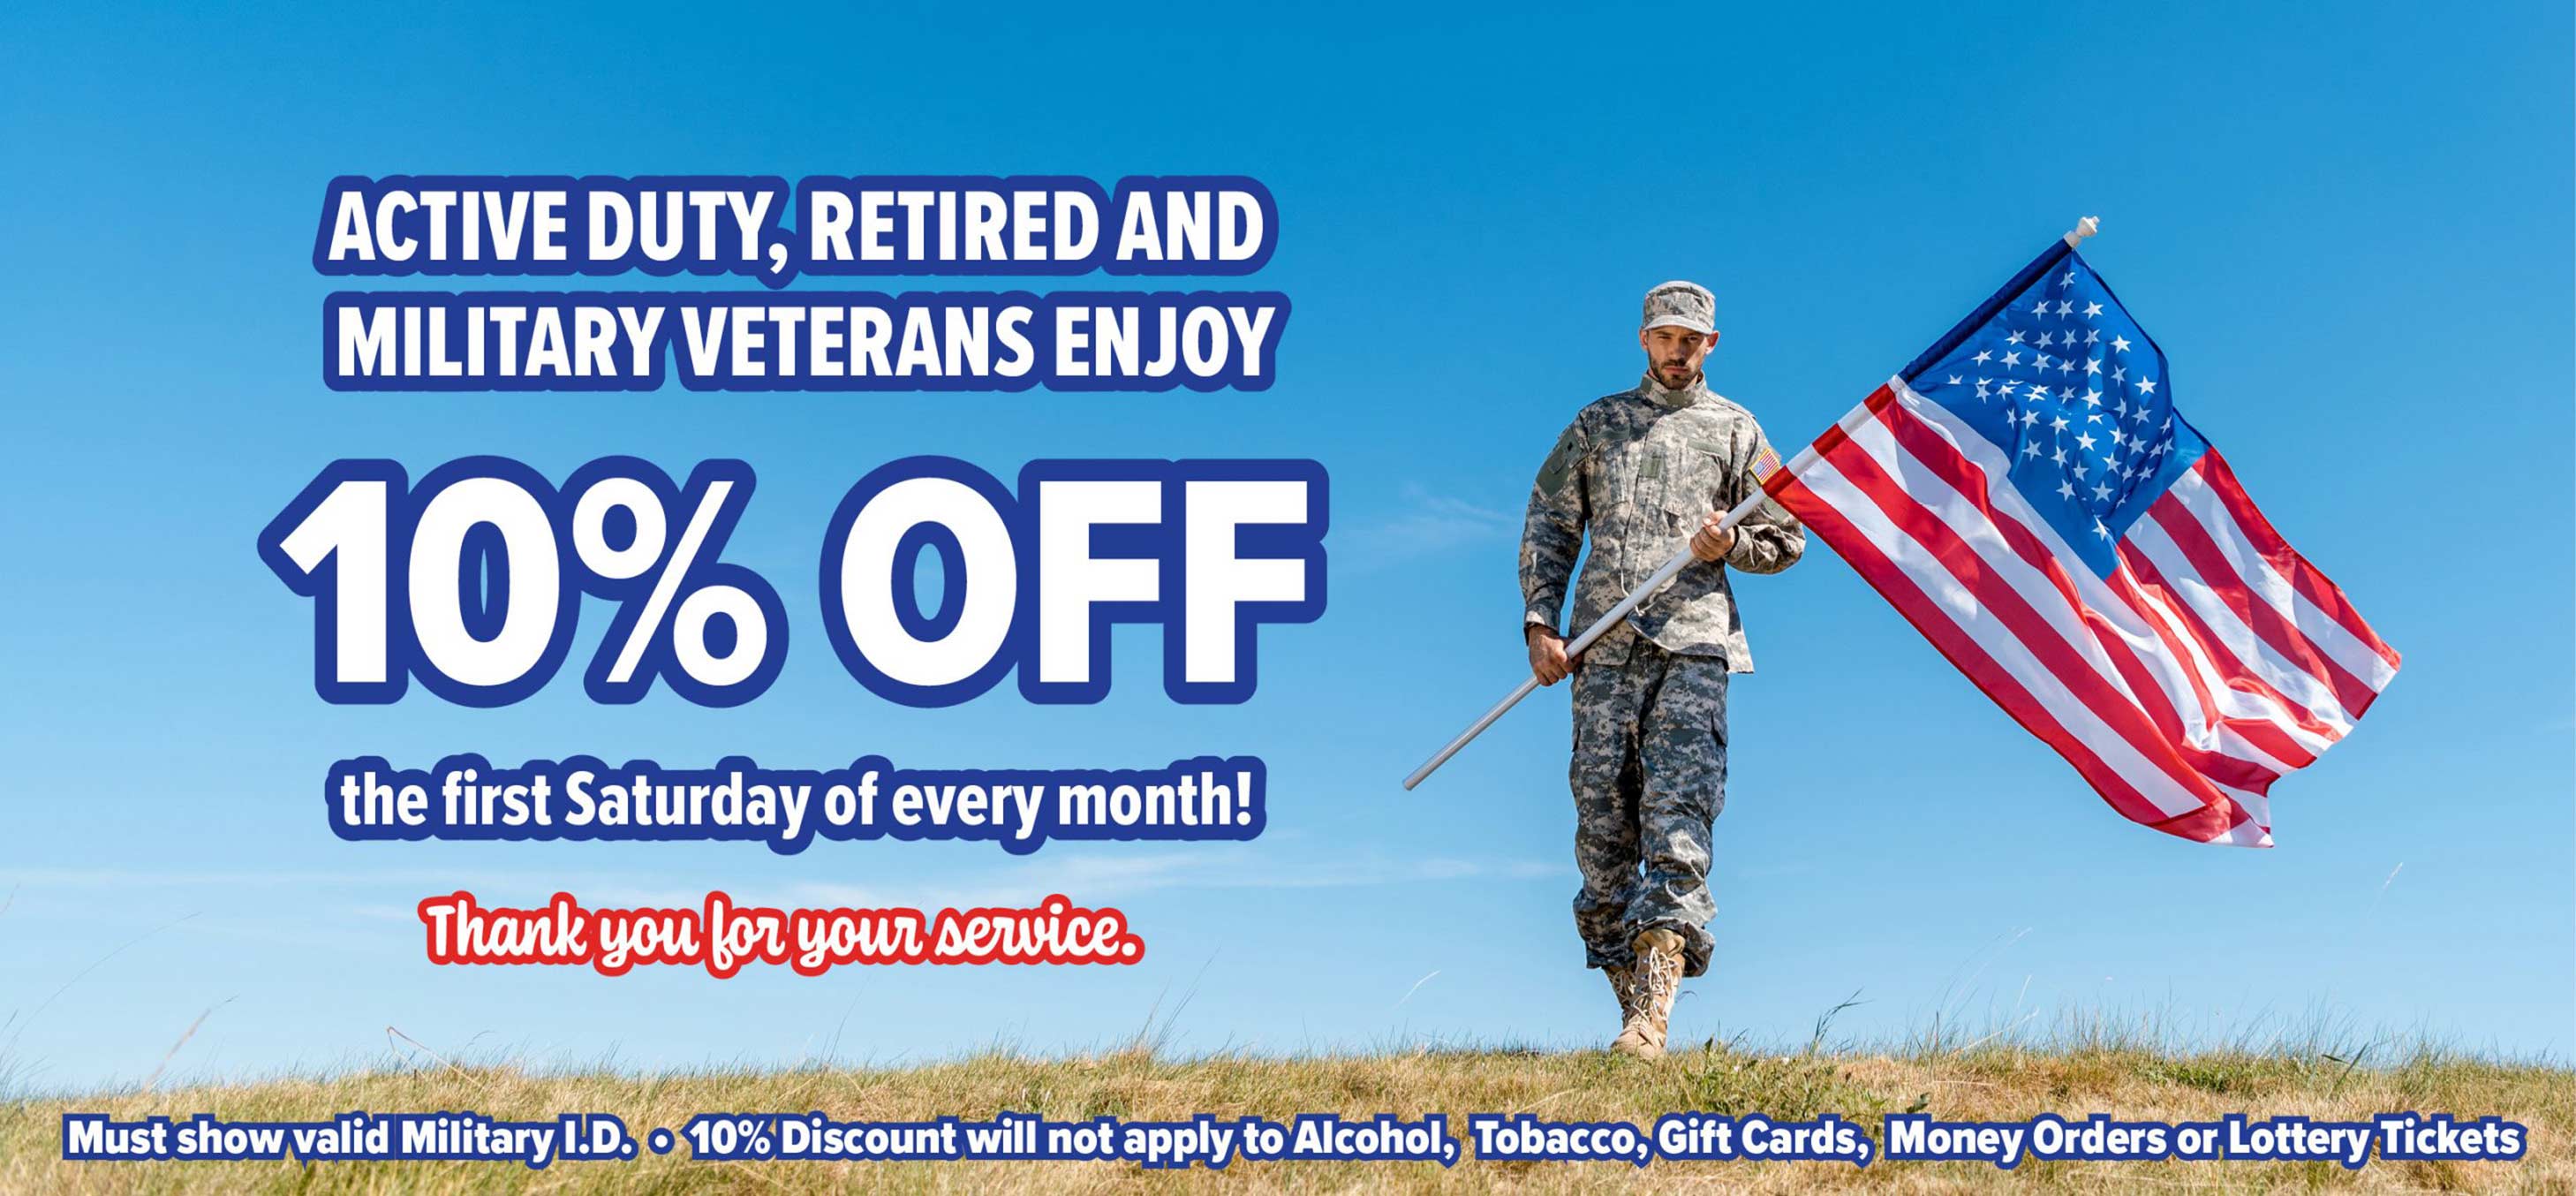 ACTIVE DUTY, RETIRED AND MILITARY VETERANS ENJOY 10% OFF the first Saturday of every month! Must show valid Military I.D.  10% Discount will not apply to Alcohol, Tobacco, Gift Cards, Money Orders or Lottery Tickets.